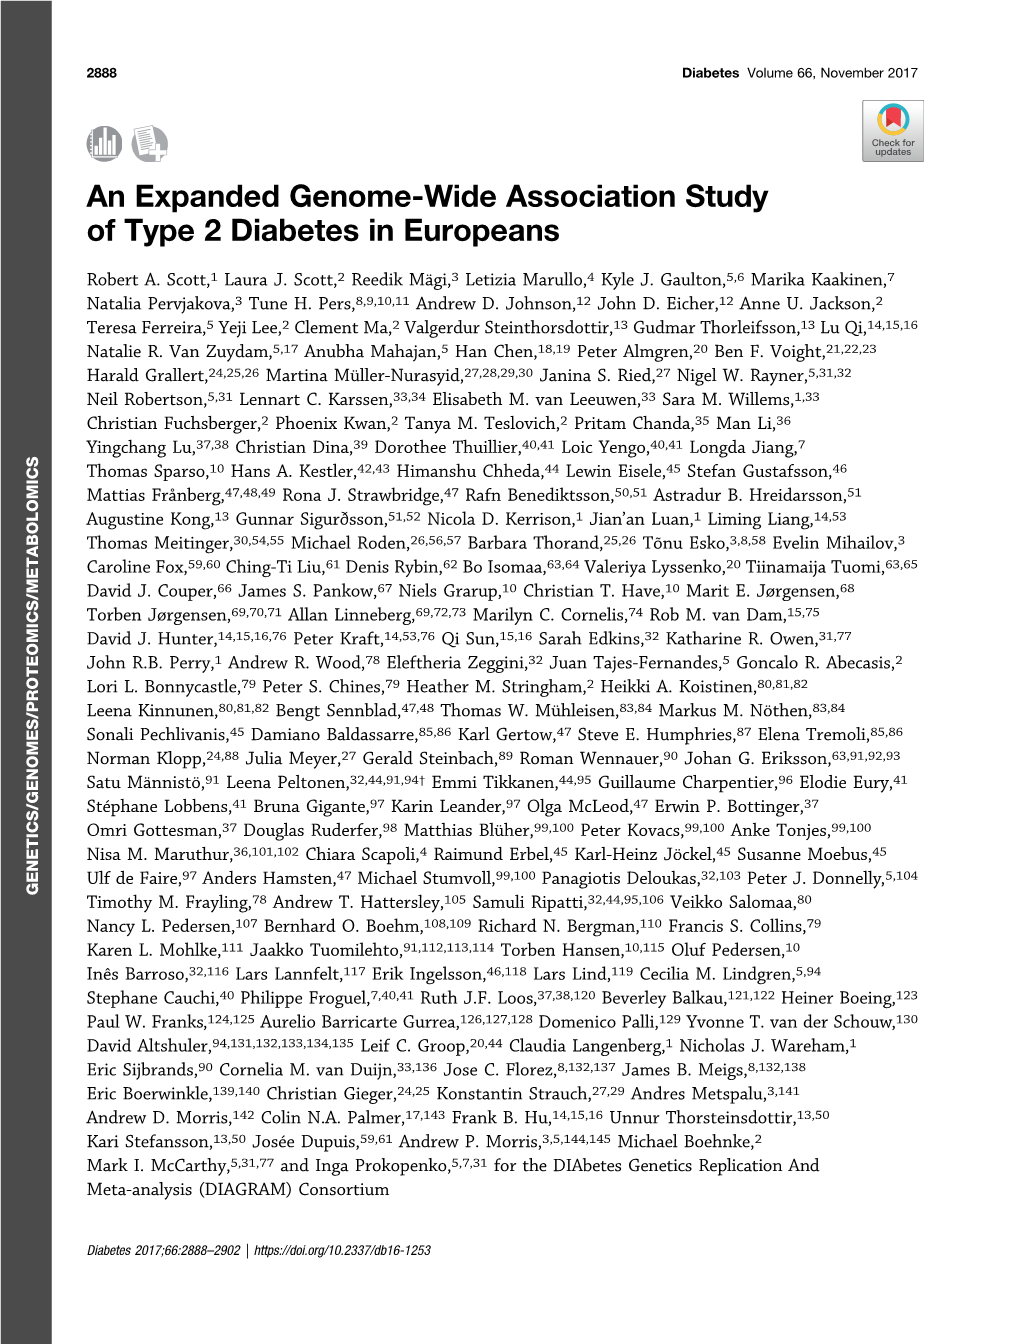 An Expanded Genome-Wide Association Study of Type 2 Diabetes in Europeans